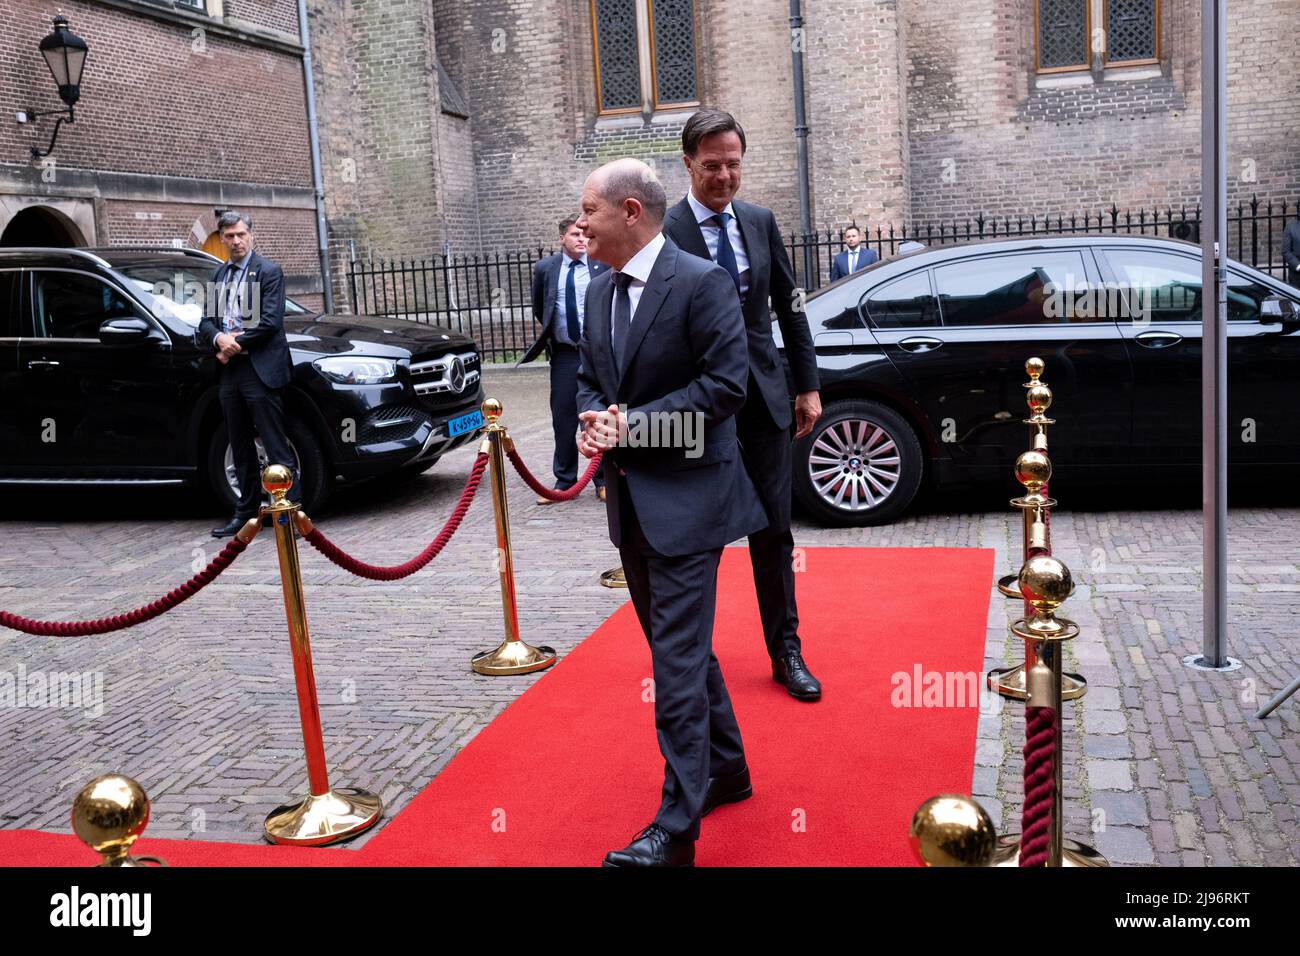 Netherlands, The Hague on 2022-05-19. German Chancellor Olaf Scholz visiting The Hague in the Netherlands for a meeting with Prime Minister Mark Rutte Stock Photo